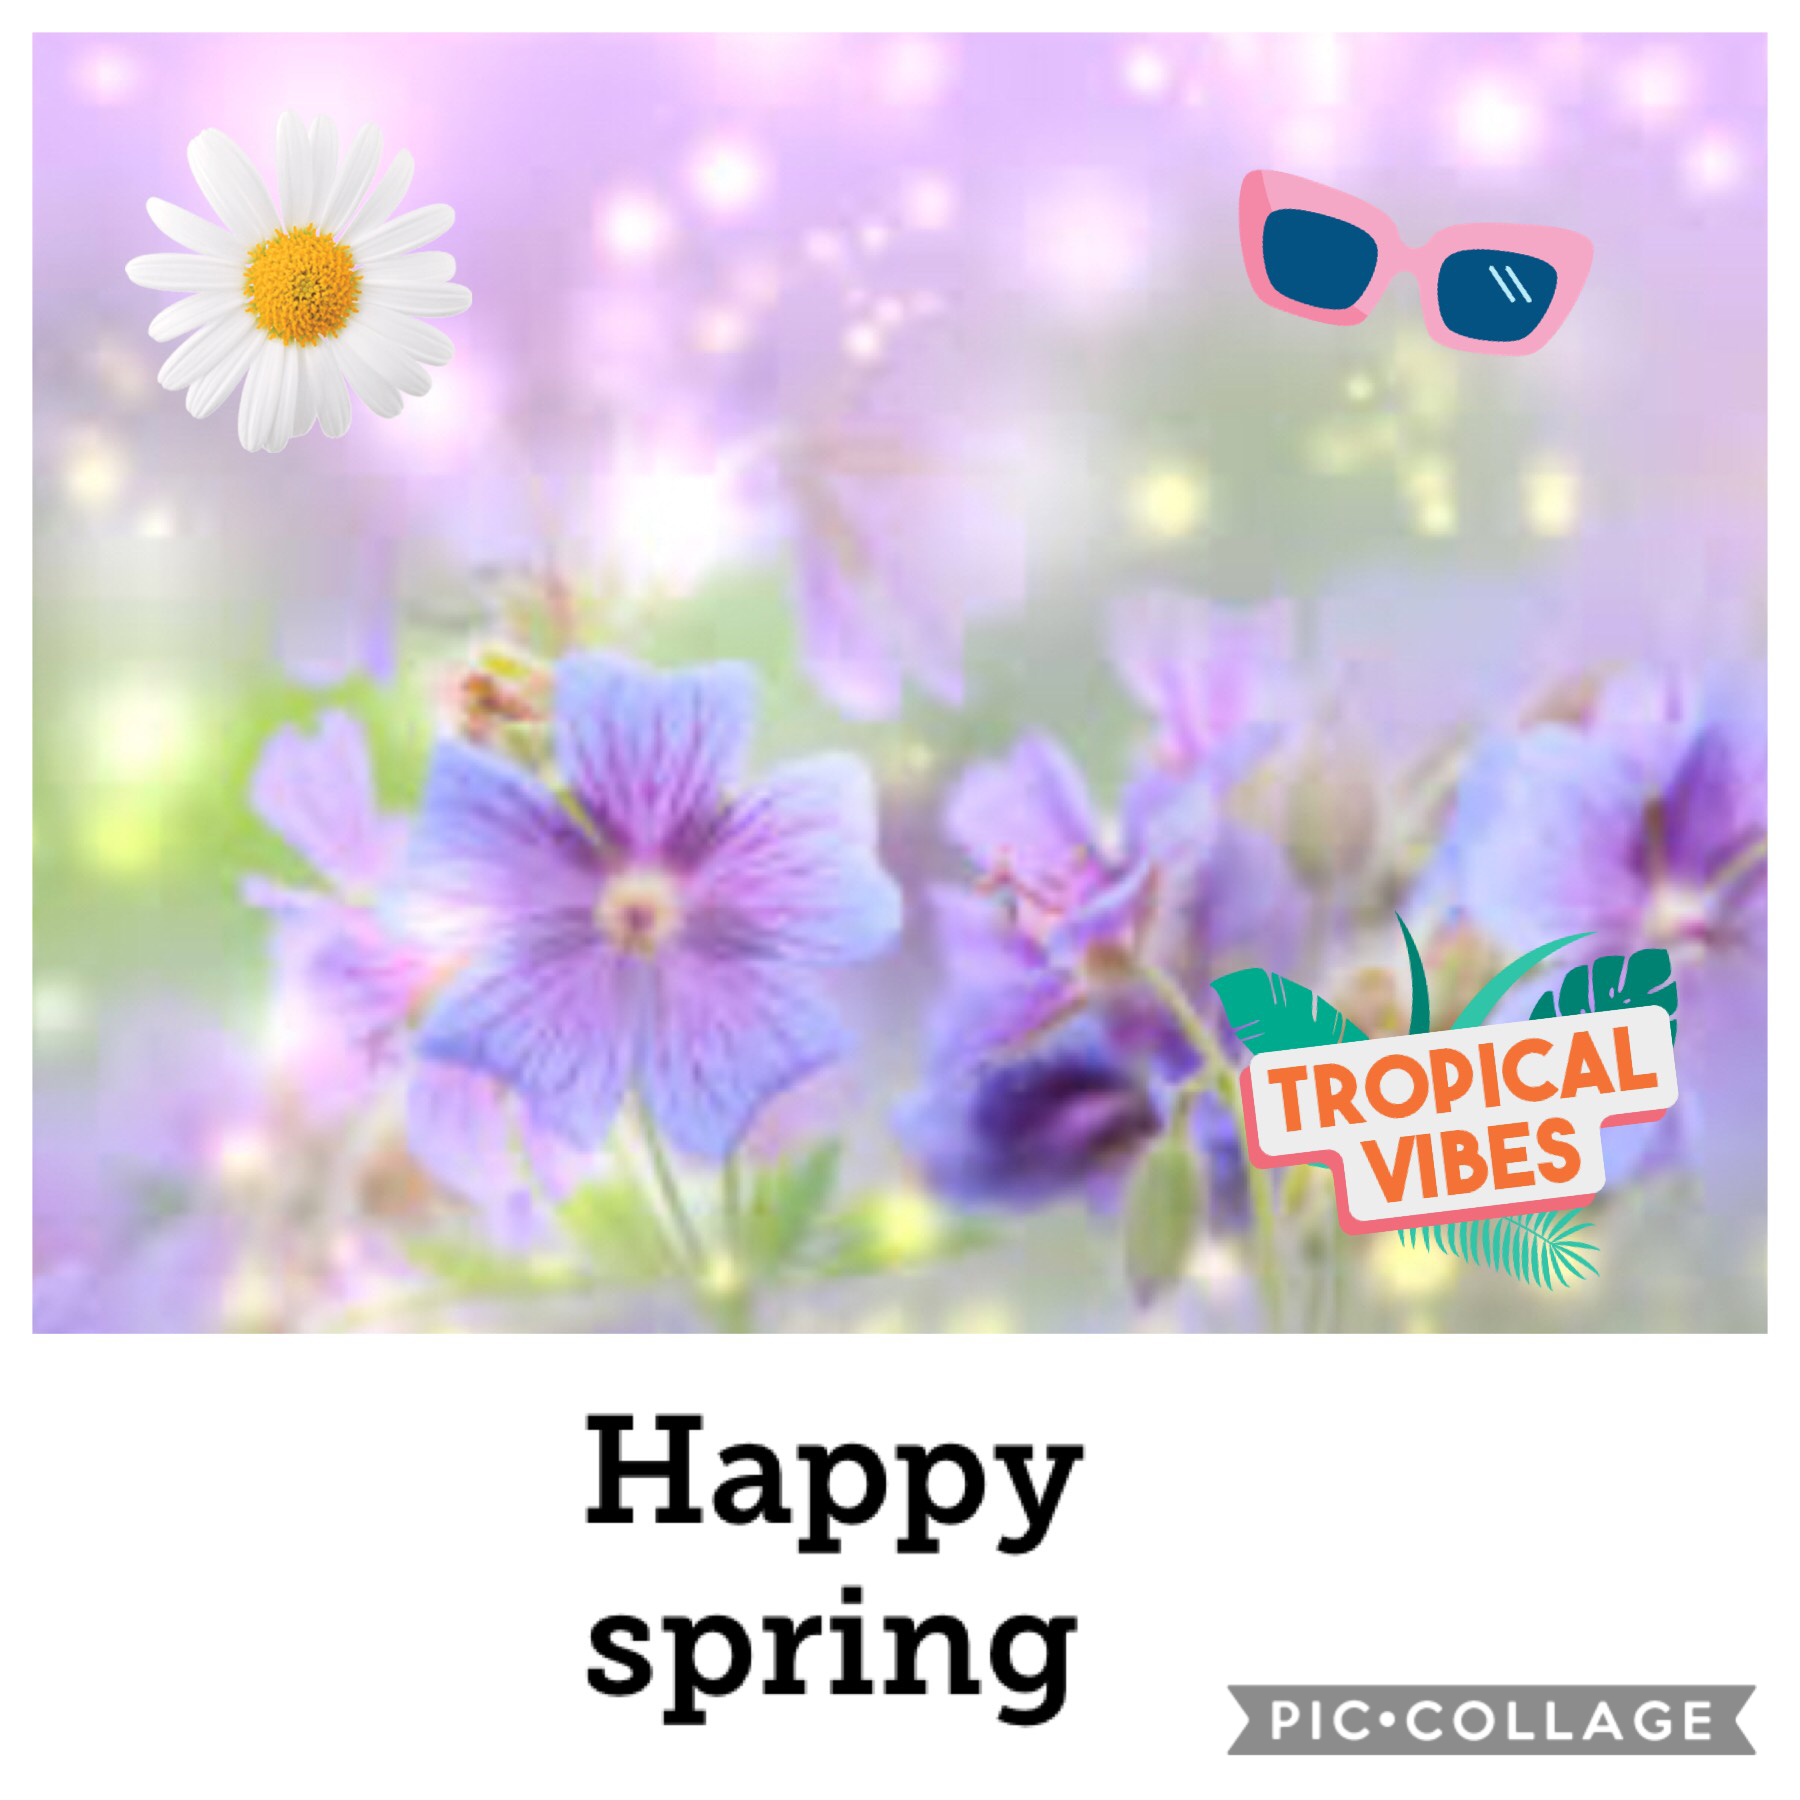 It’s spring time 